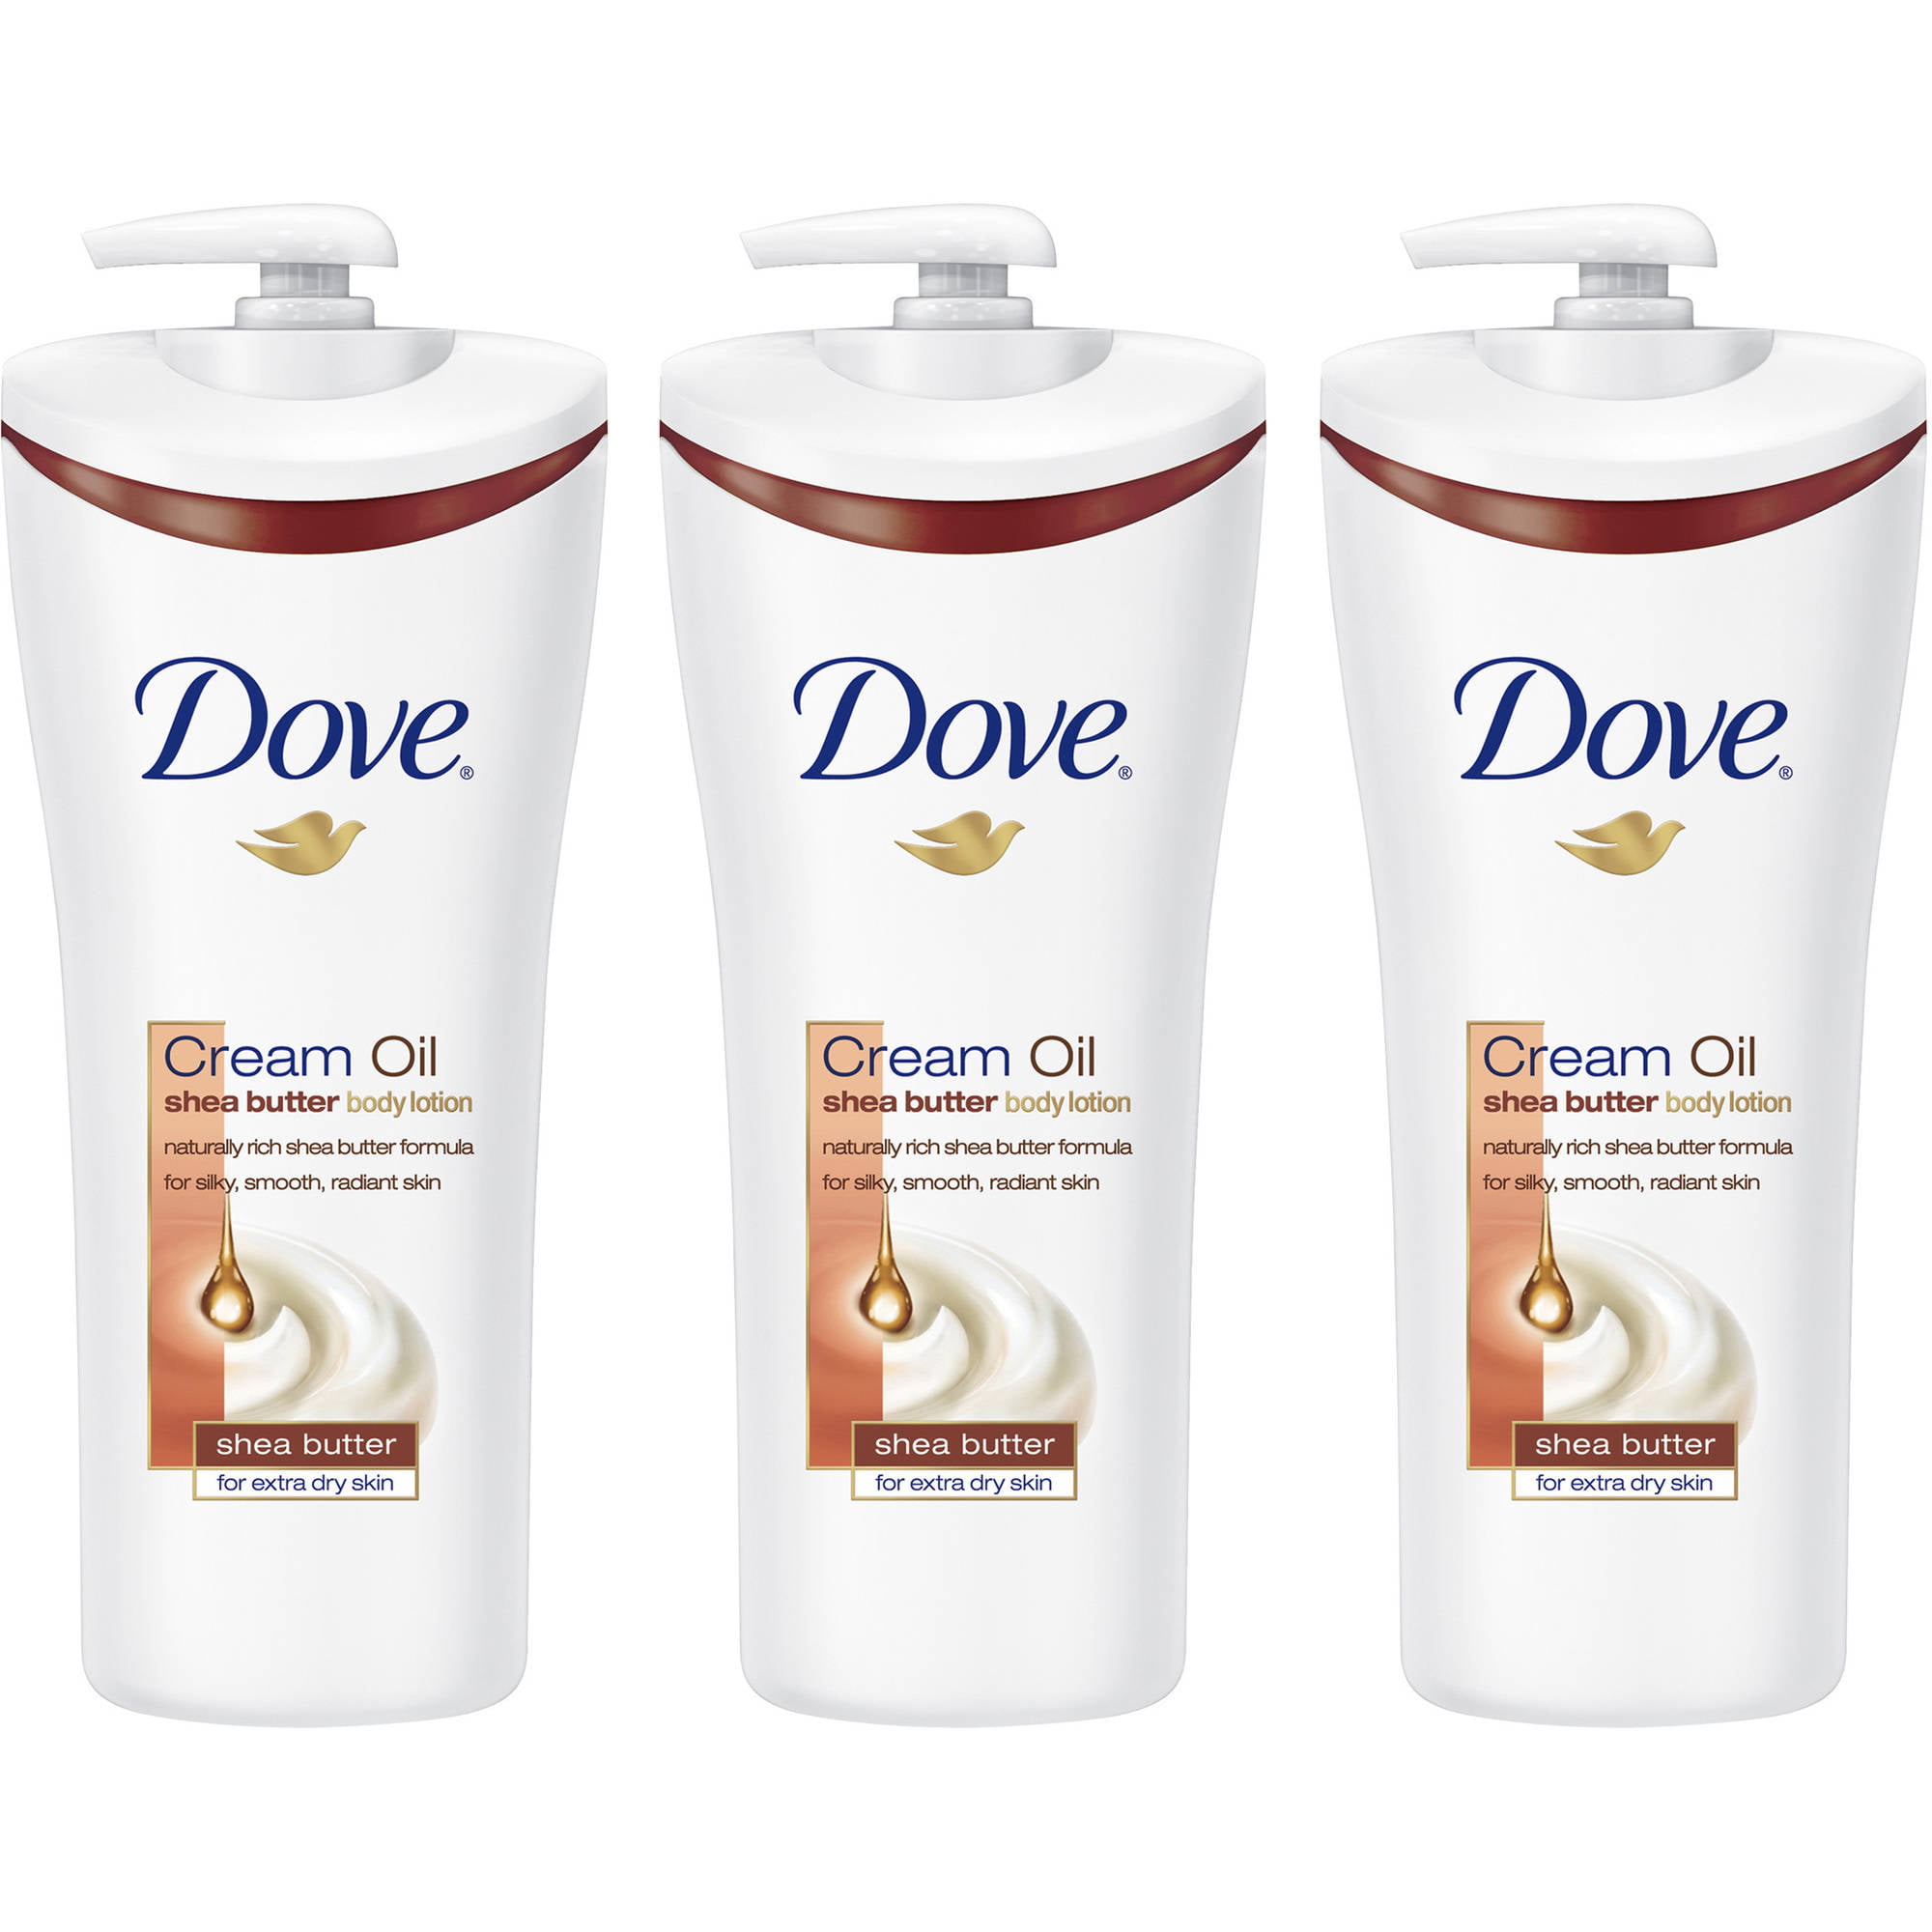 Dove Cream Oil Body Lotion With Warming Vanilla Scent Moisturizer For Dry Skin Shea Butter Body 